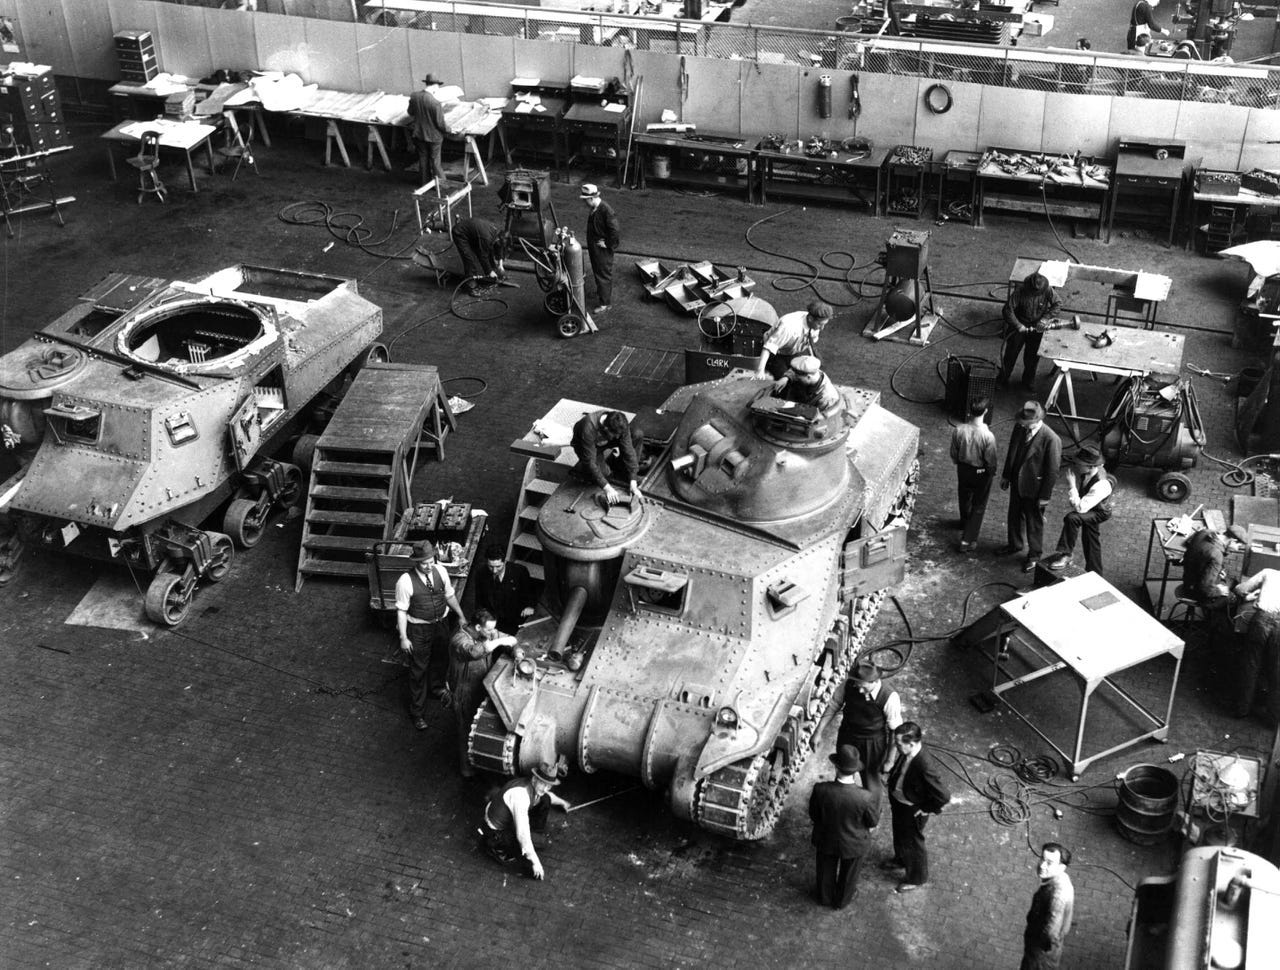 These Word War II tanks were assembled at the Chrysler tank arsenal in then rural Warren and would soon become a part of General George Patton's own "blitzkrieg". The bombing of Pearl Harbor on Dec. 7, 1941, threw the U.S. into the war, spurring a huge increase in aircraft production, as well as tanks and military vehicles. The government banned civilian auto production. By June of 1942, 66 percent of Detroit's machine tools were being used for military goods.